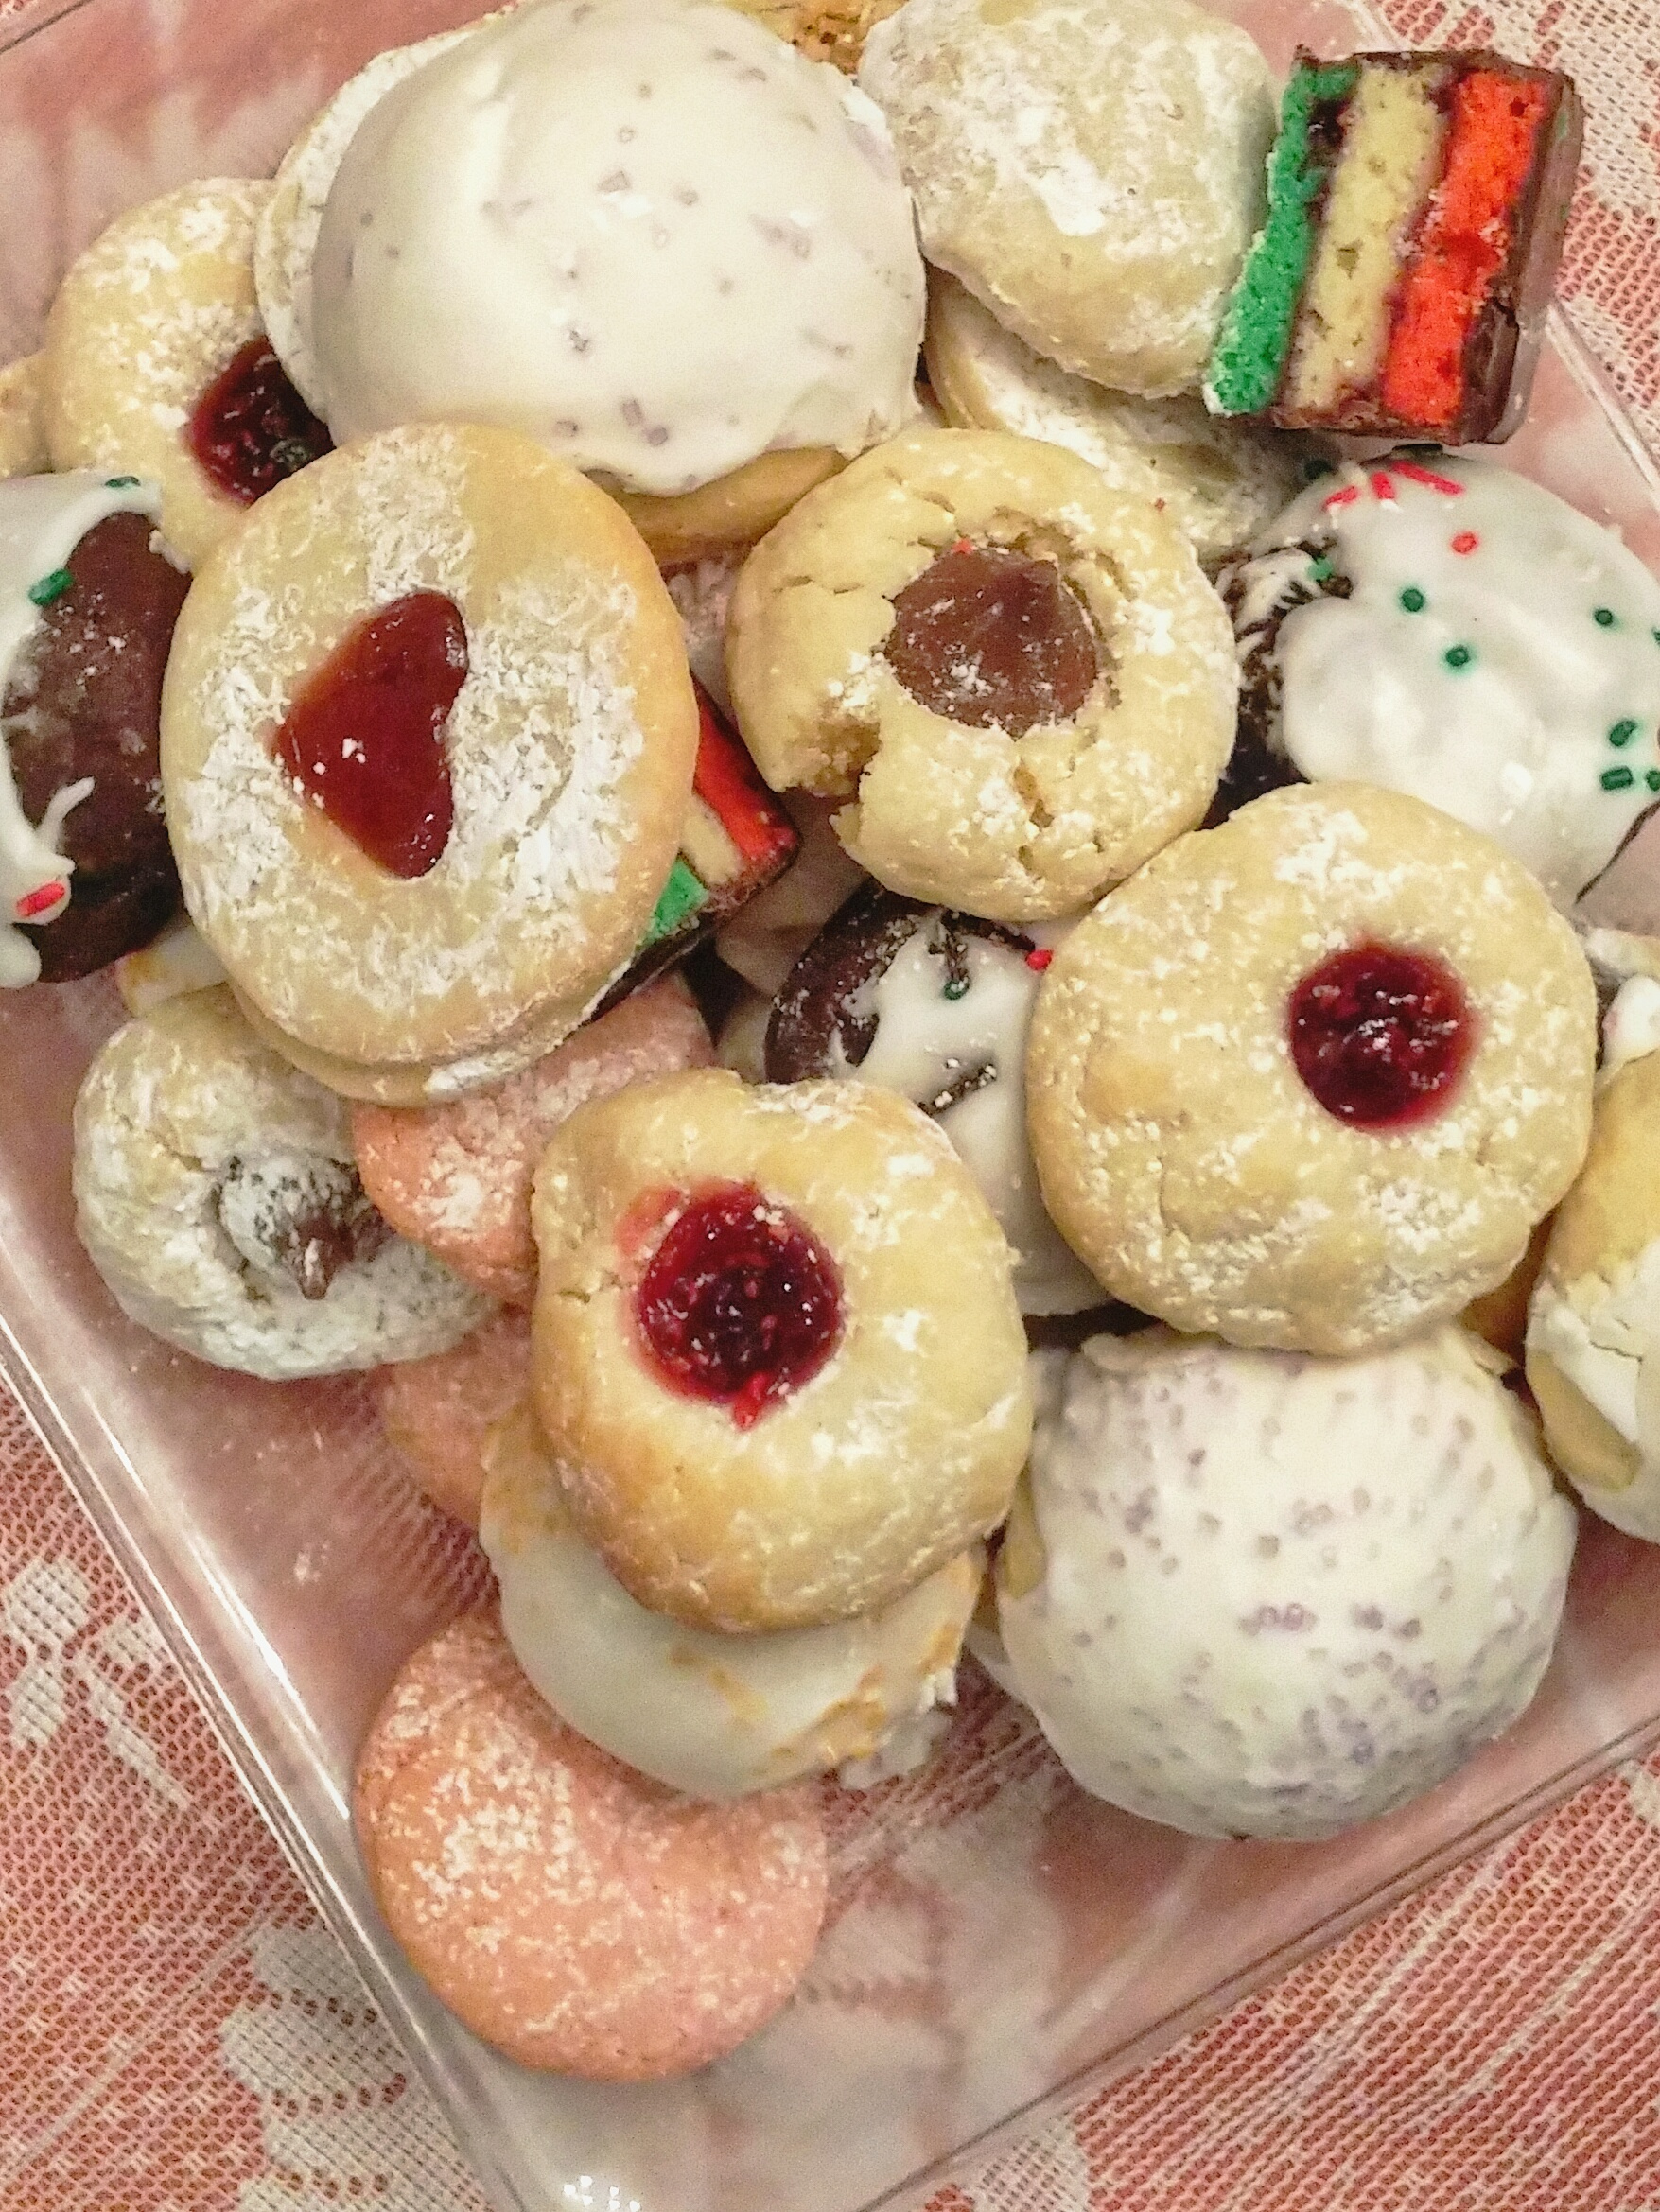 An assortment of homemade cookies including jam-filled and chocolate-dipped varieties on a plate